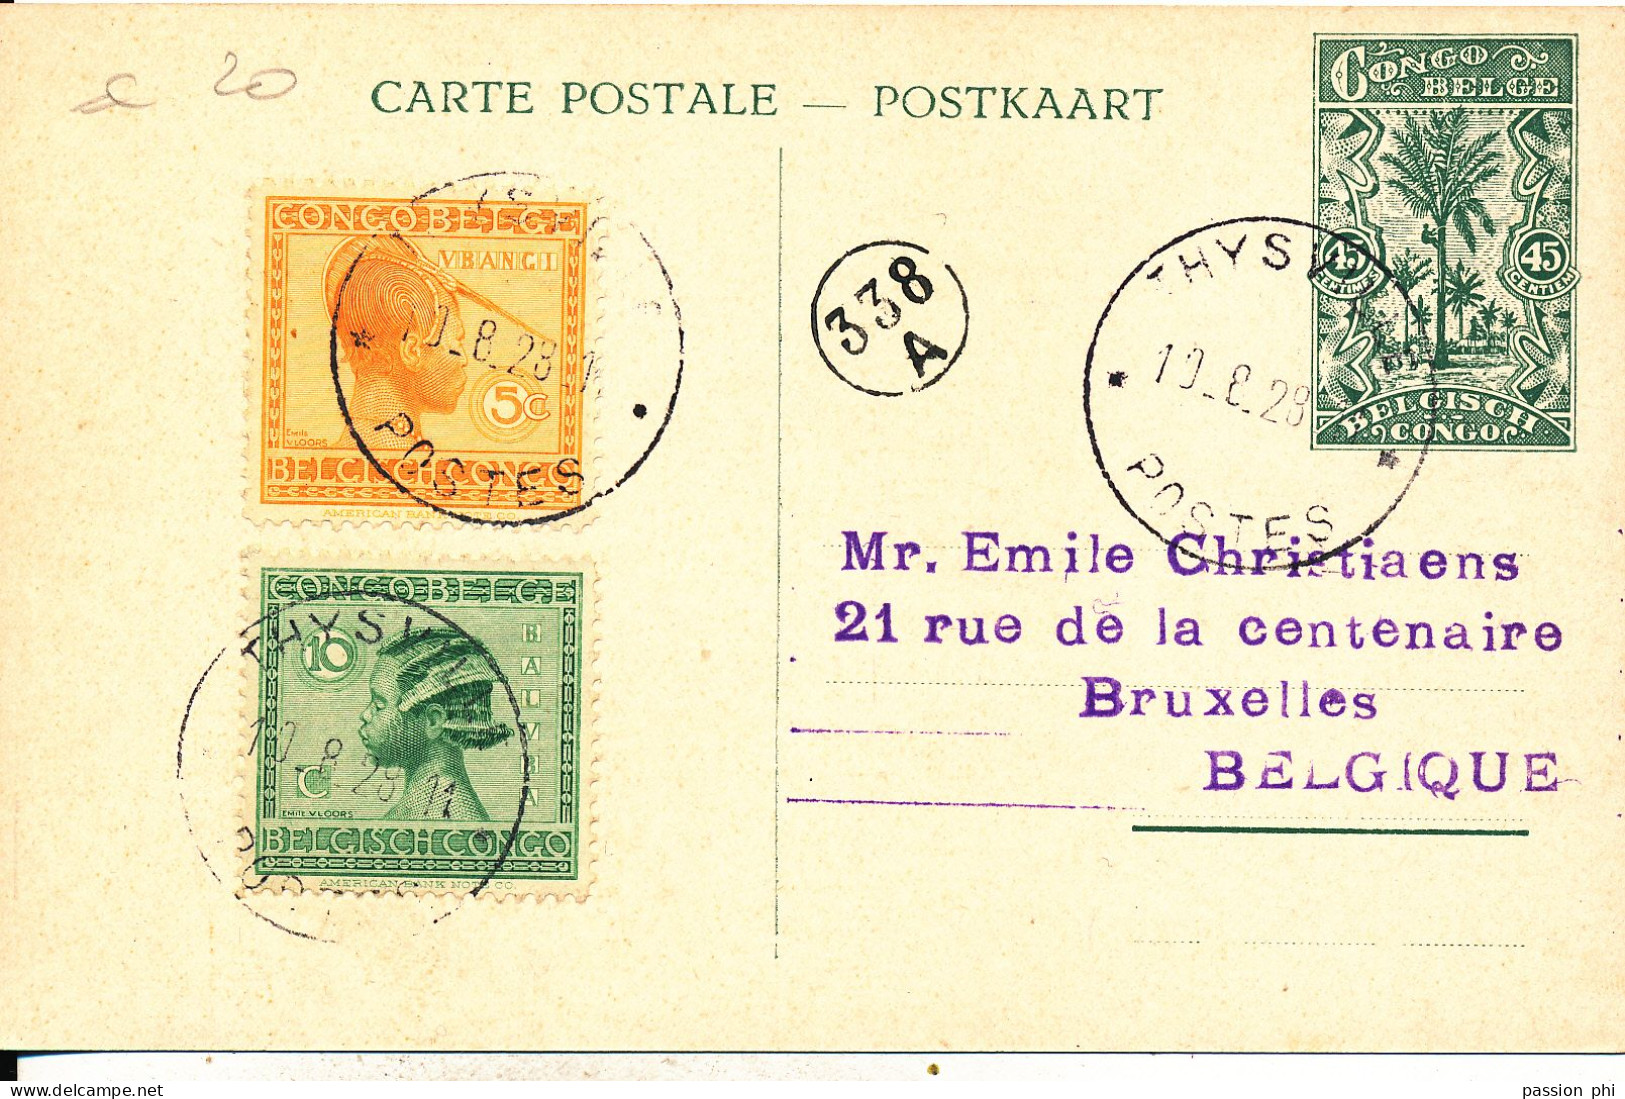 BELGIAN CONGO 1912 ISSUE PPS SBEP 66a VIEW 16 USED - Enteros Postales